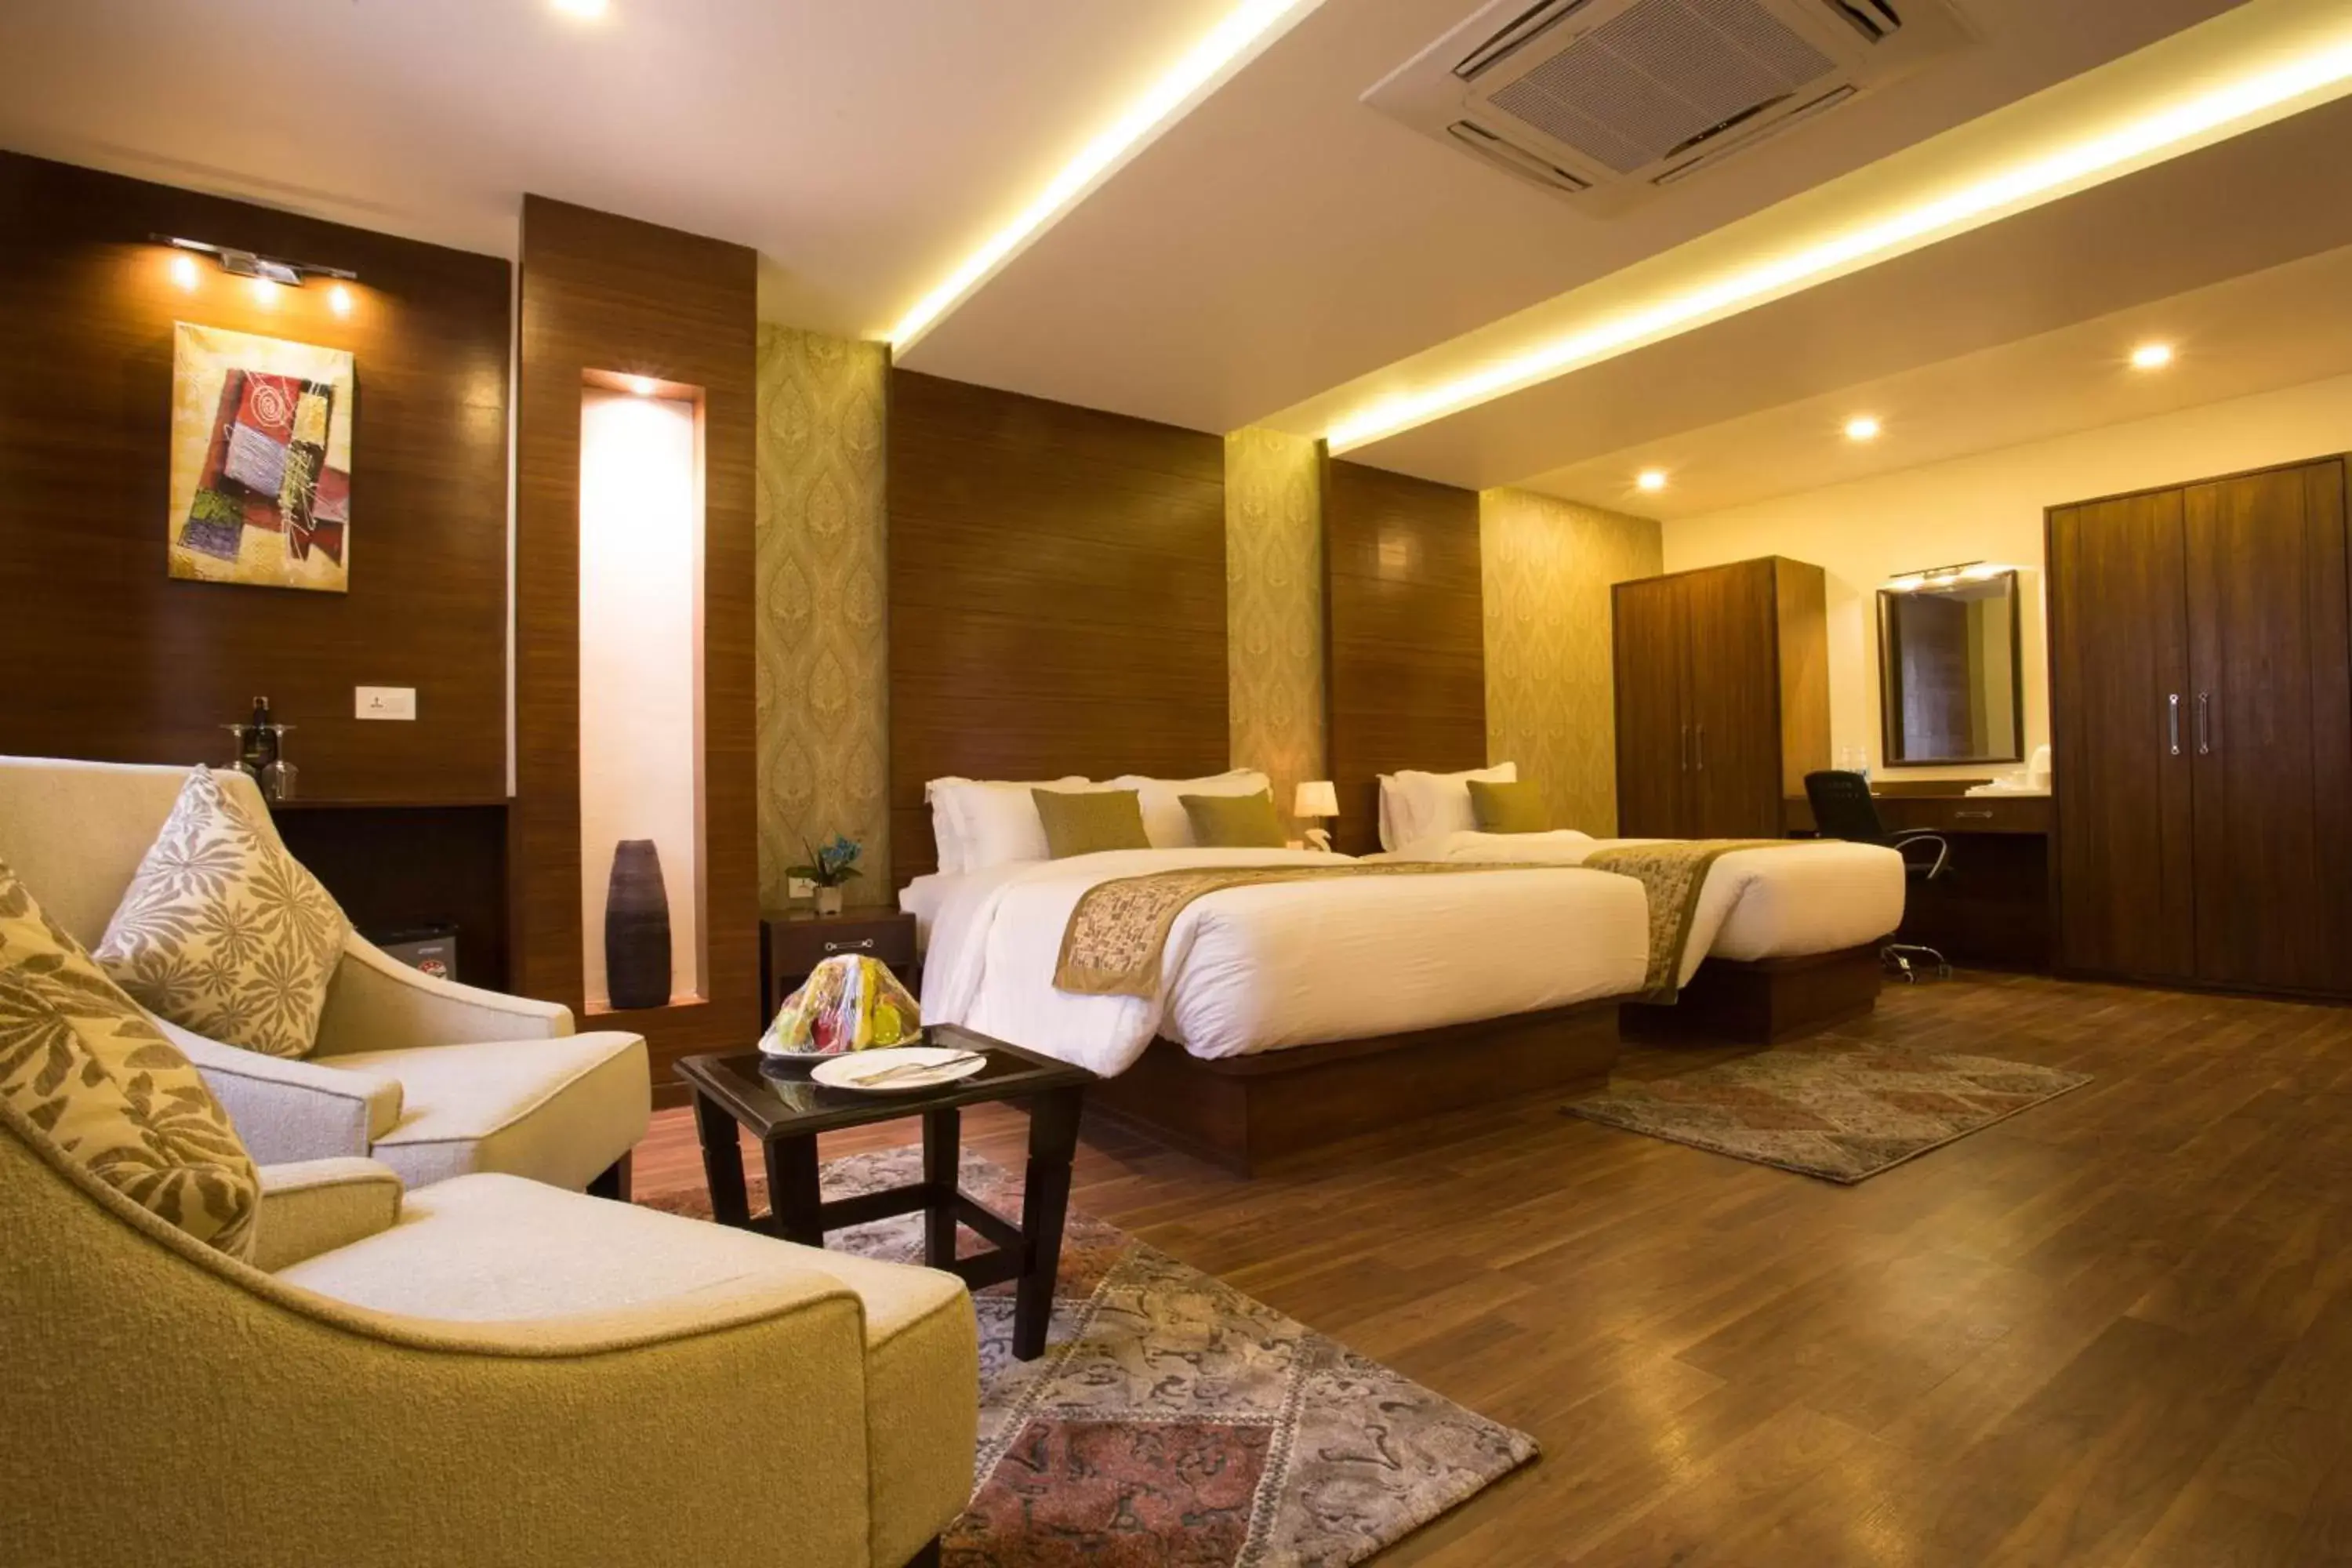 Bedroom, Room Photo in Yatri Suites and Spa